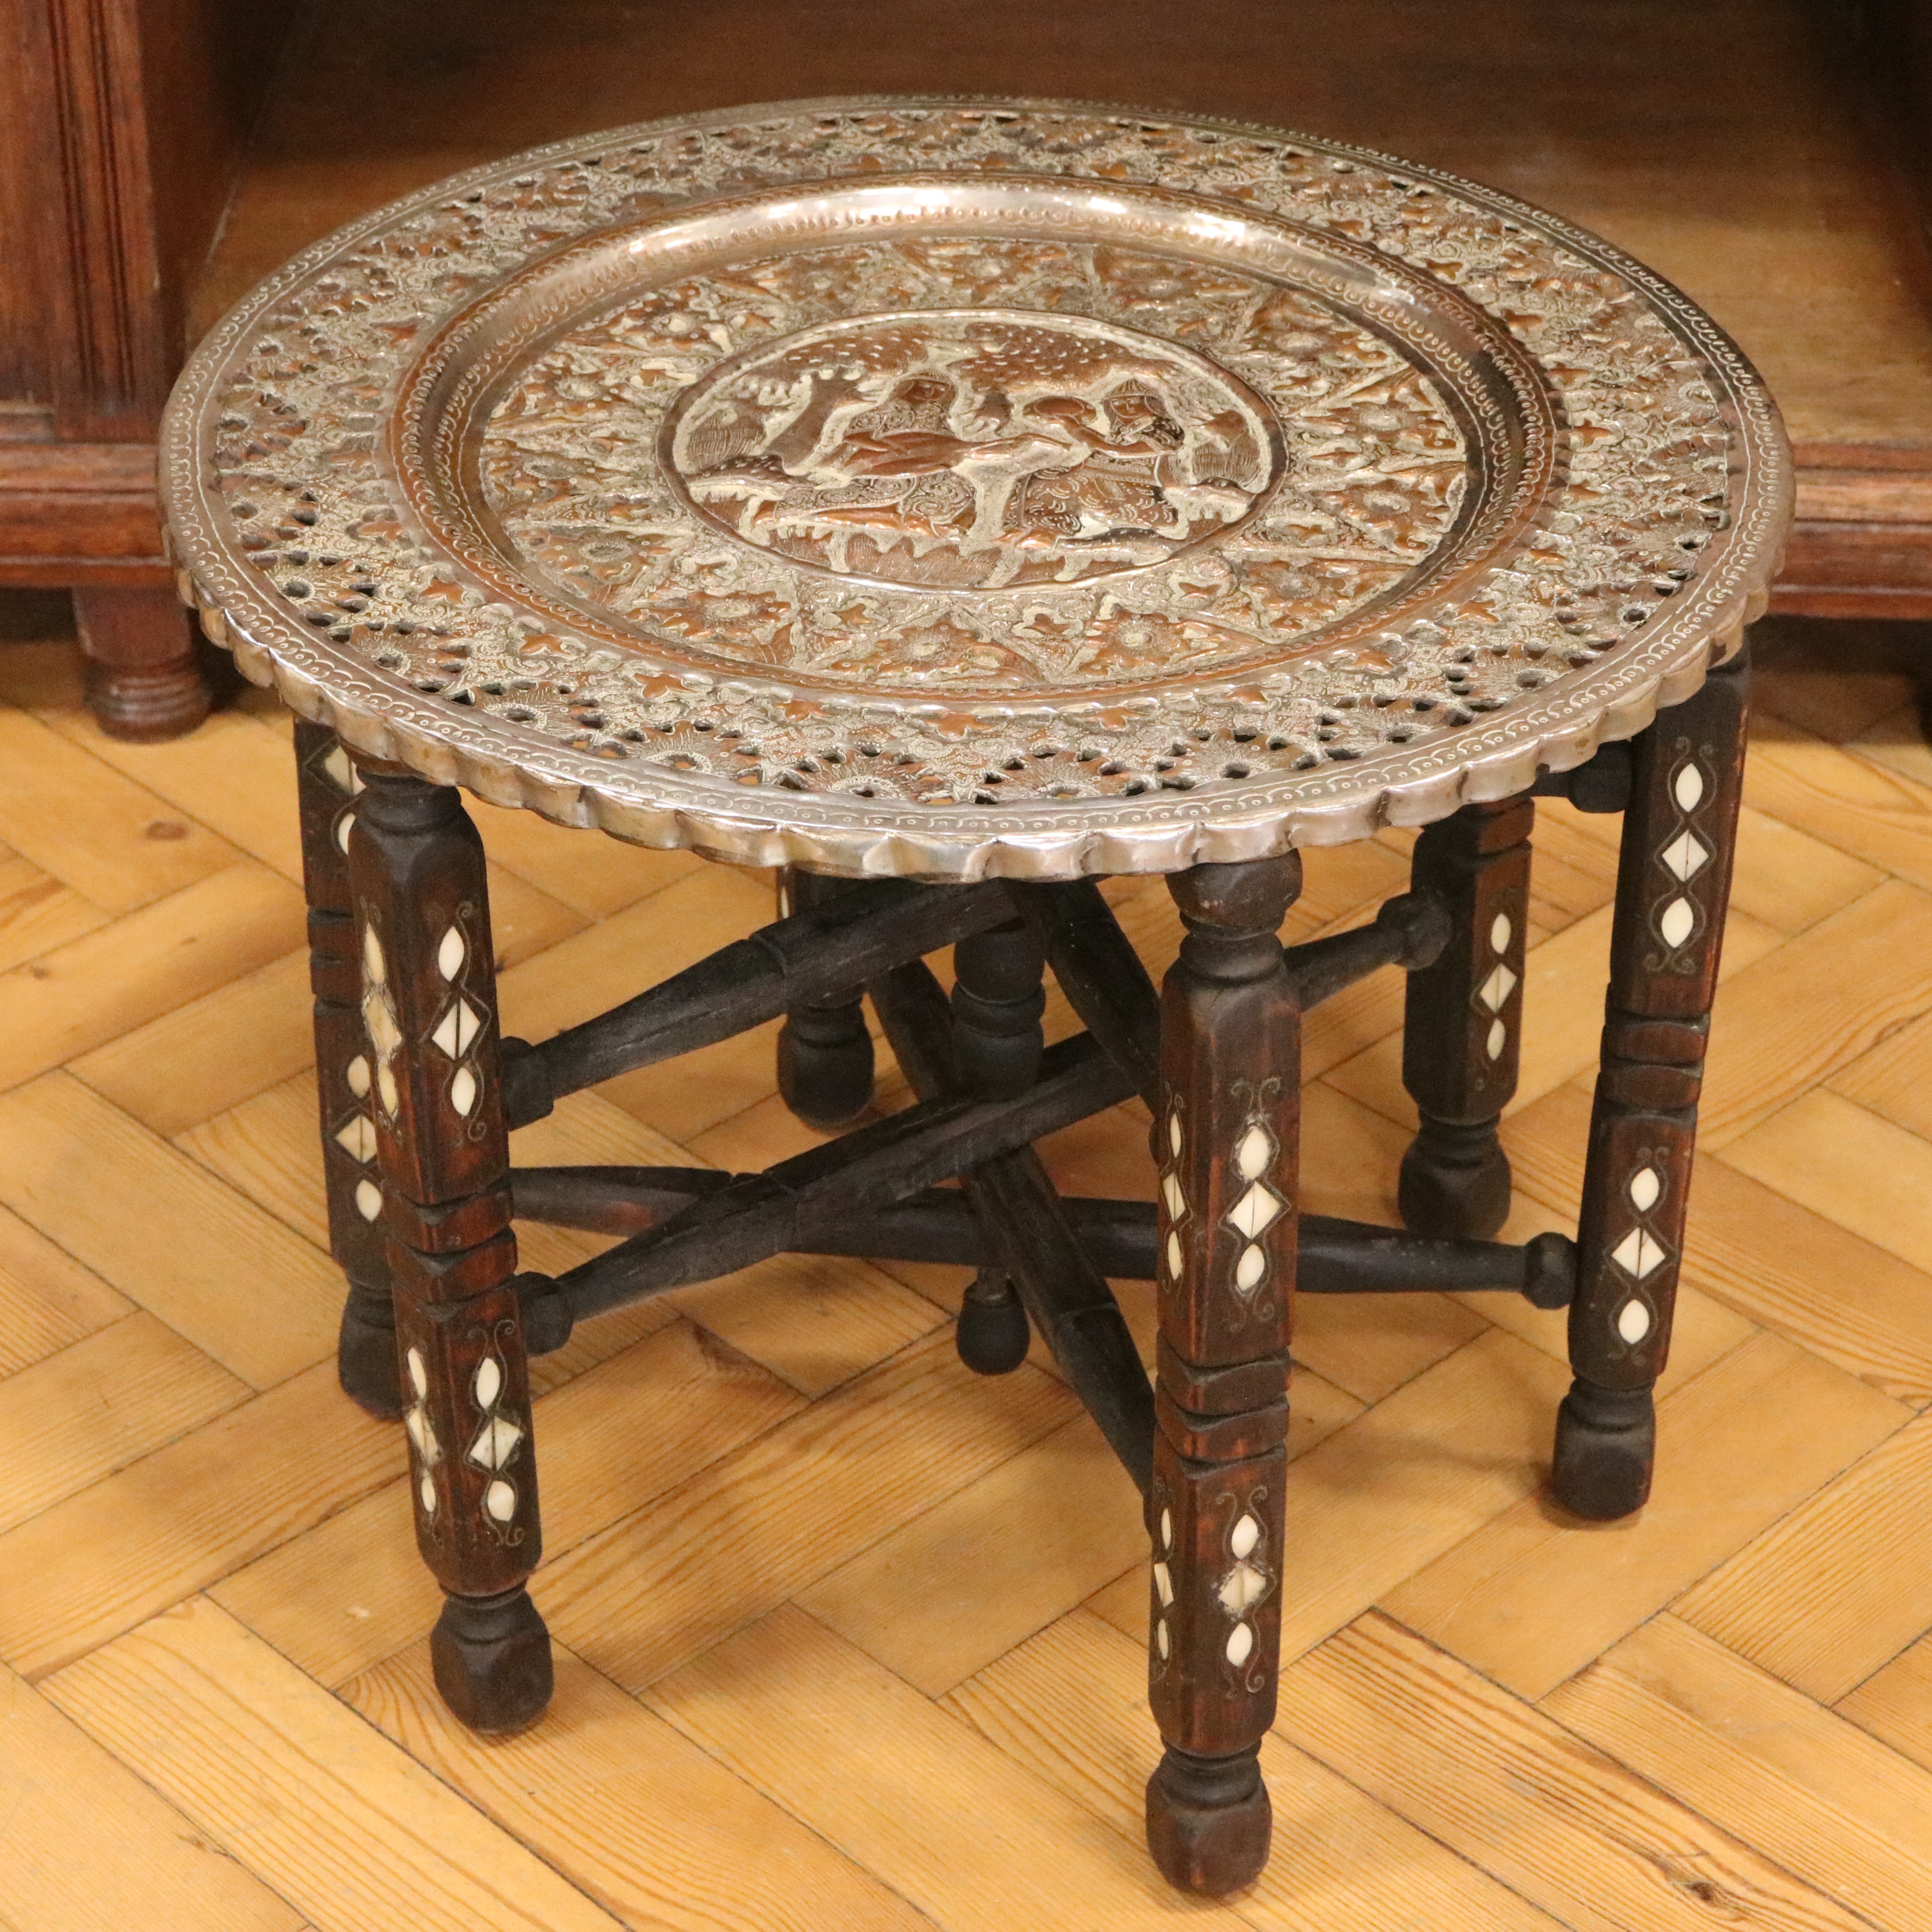 An early-to-mid 20th Century Persian copper-topped and mother-of-pearl inlaid folding table, 52 cm x